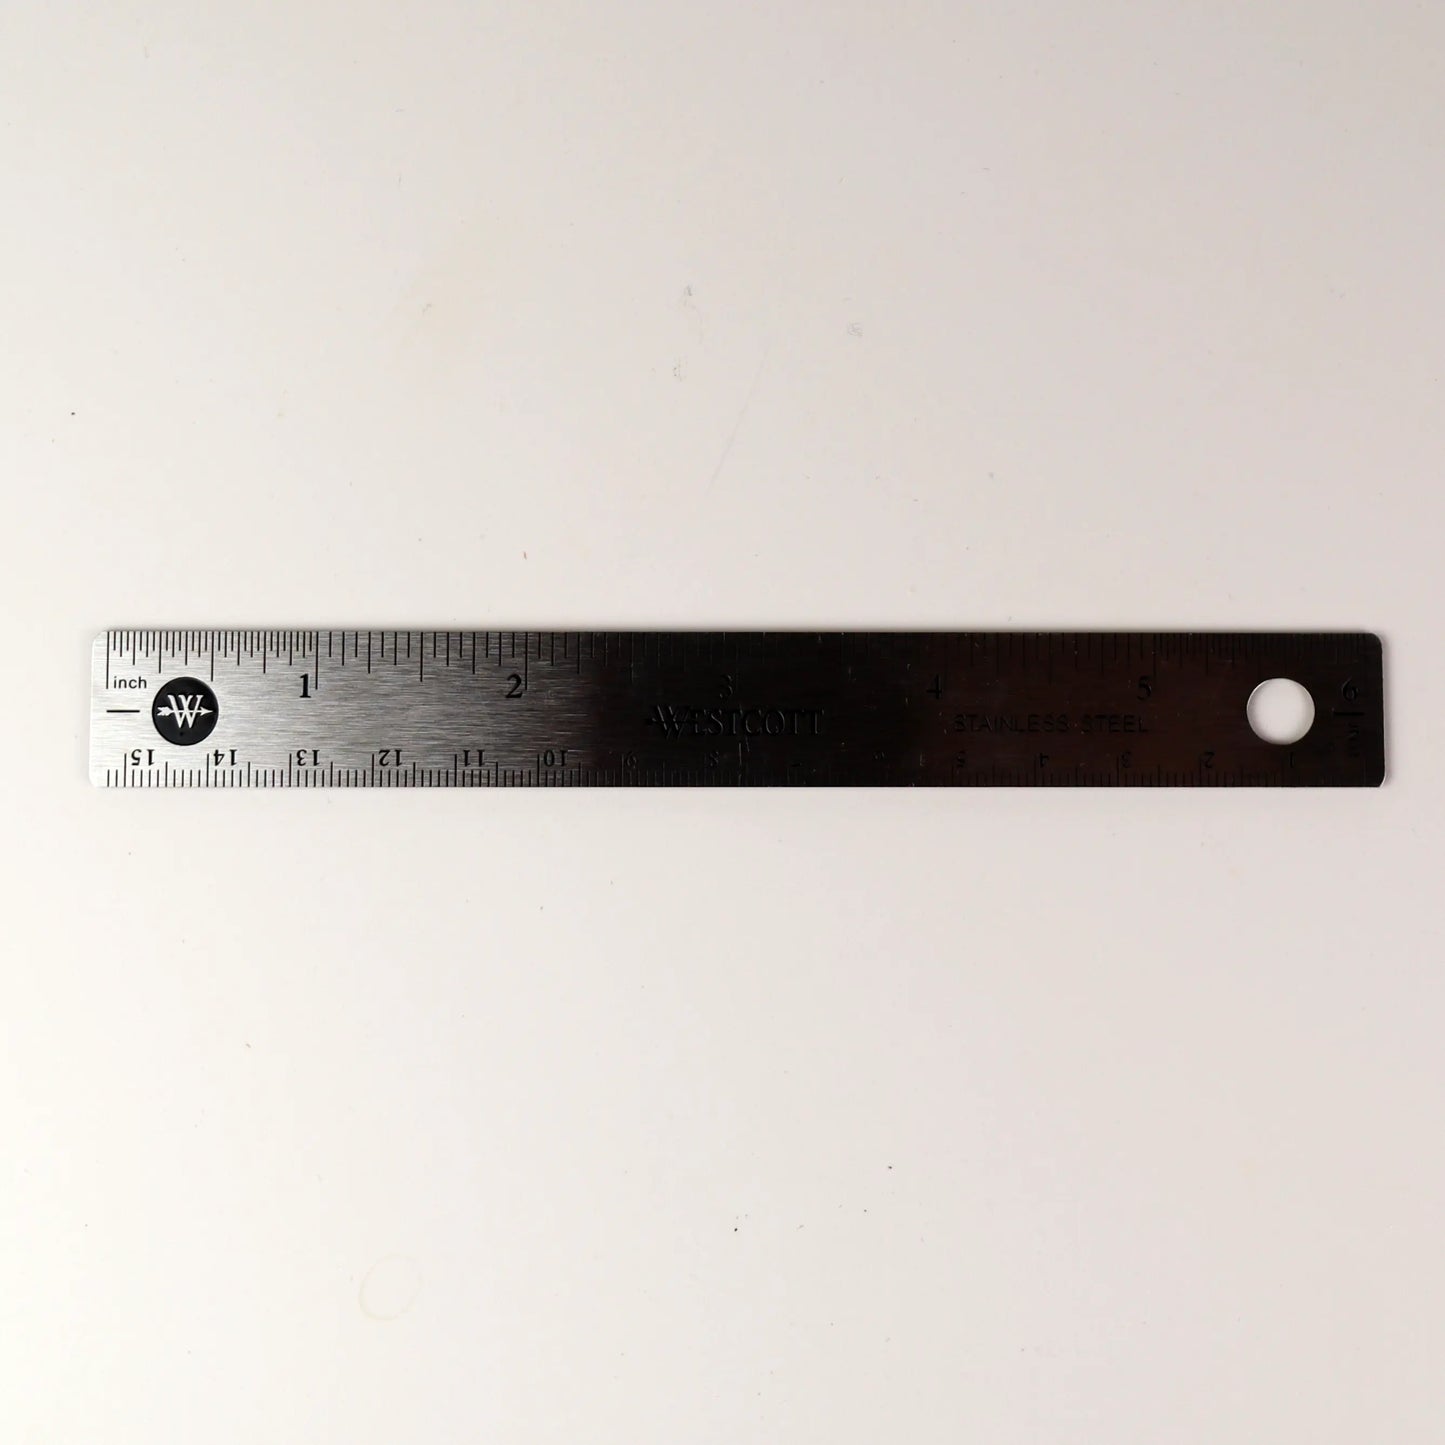 6 Inch Stainless Steel Ruler